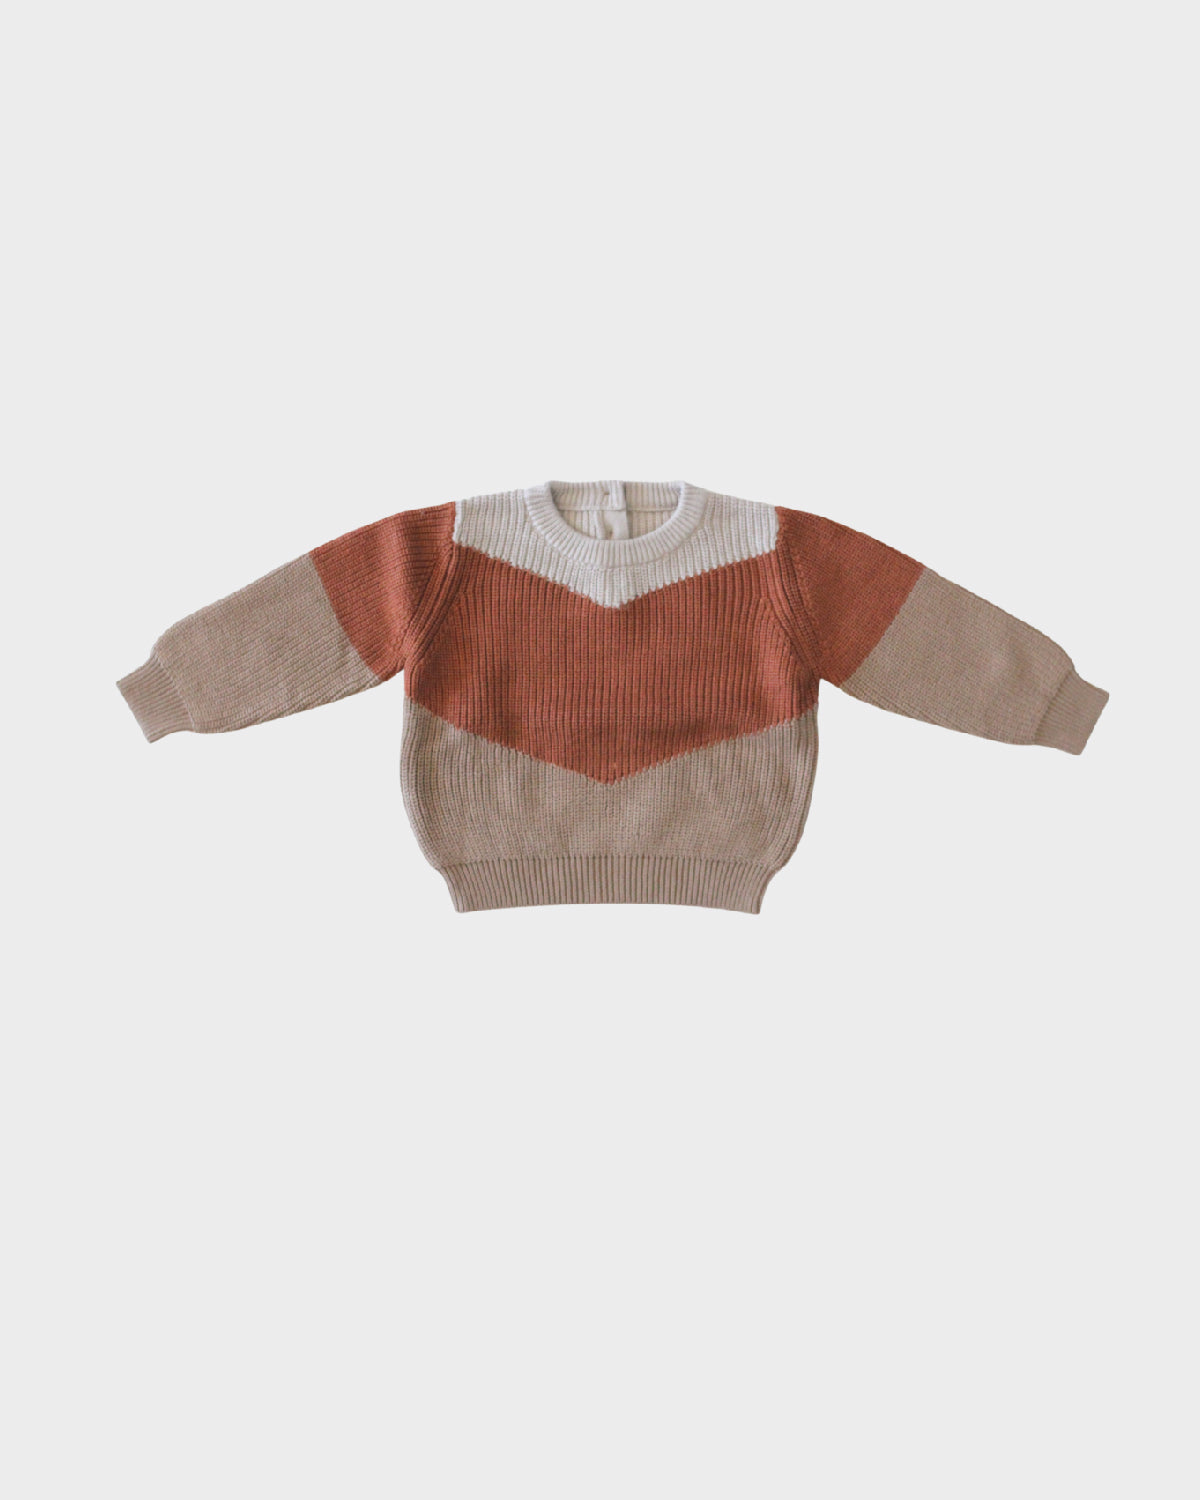 Tri Color Knit Sweater SAMPLES